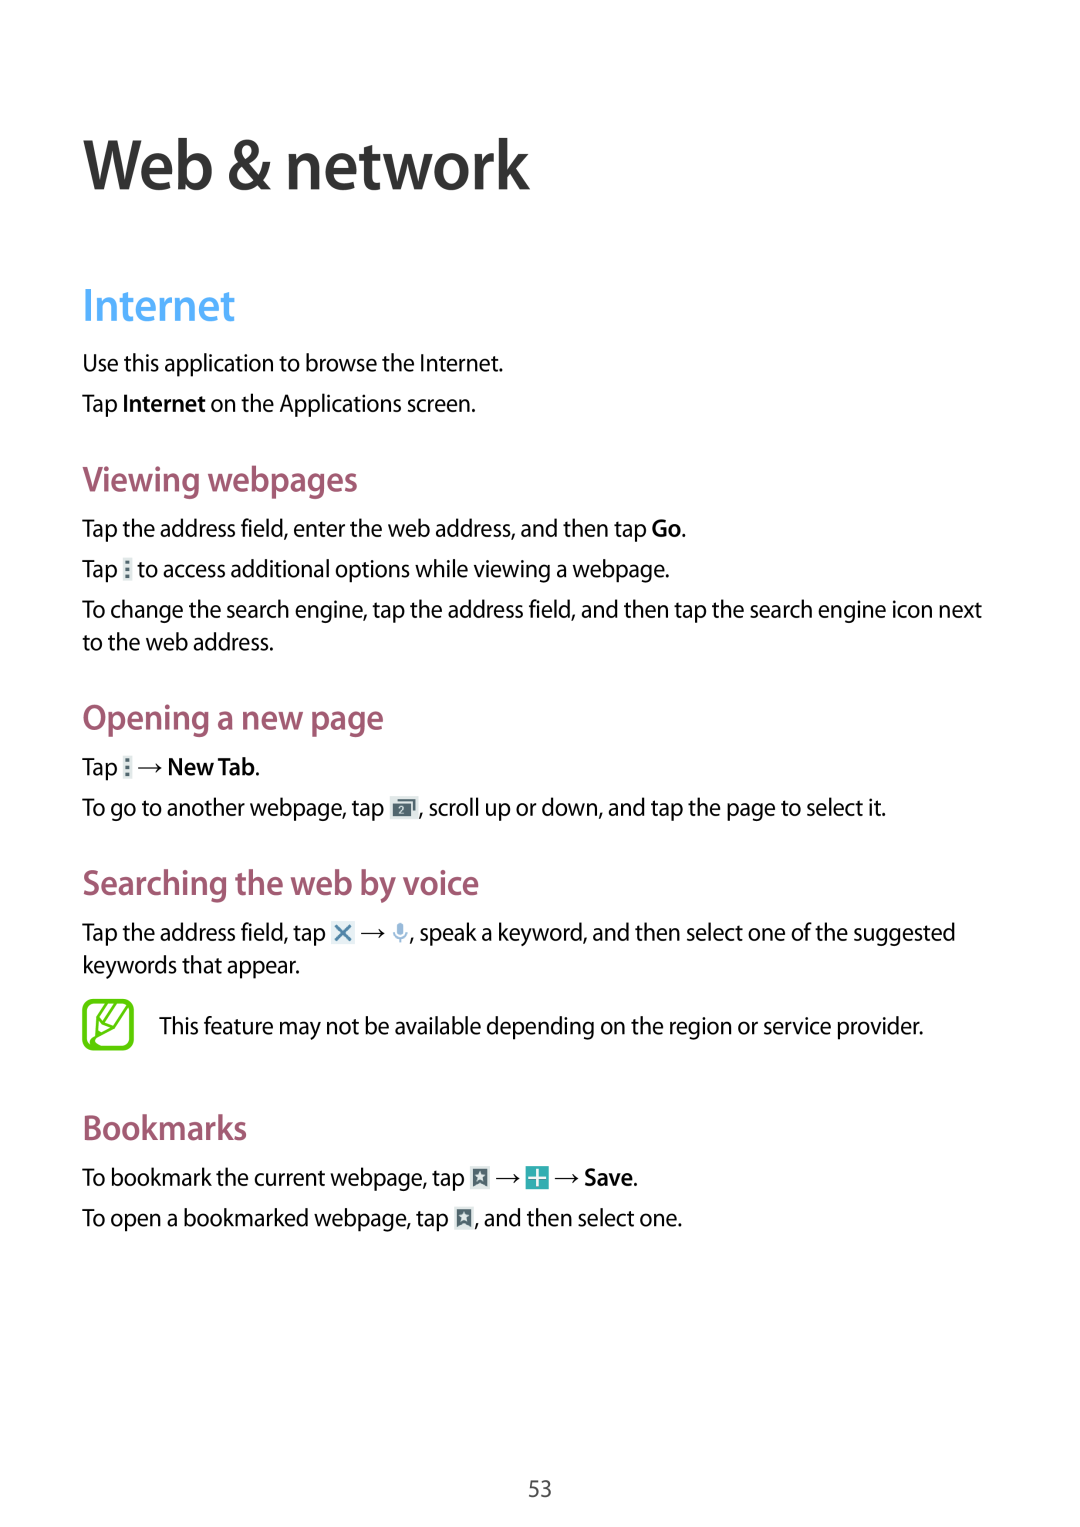 Samsung GT-I9195DKIDBT manual Web & network, Internet, Viewing webpages, Opening a new page, Searching the web by voice 